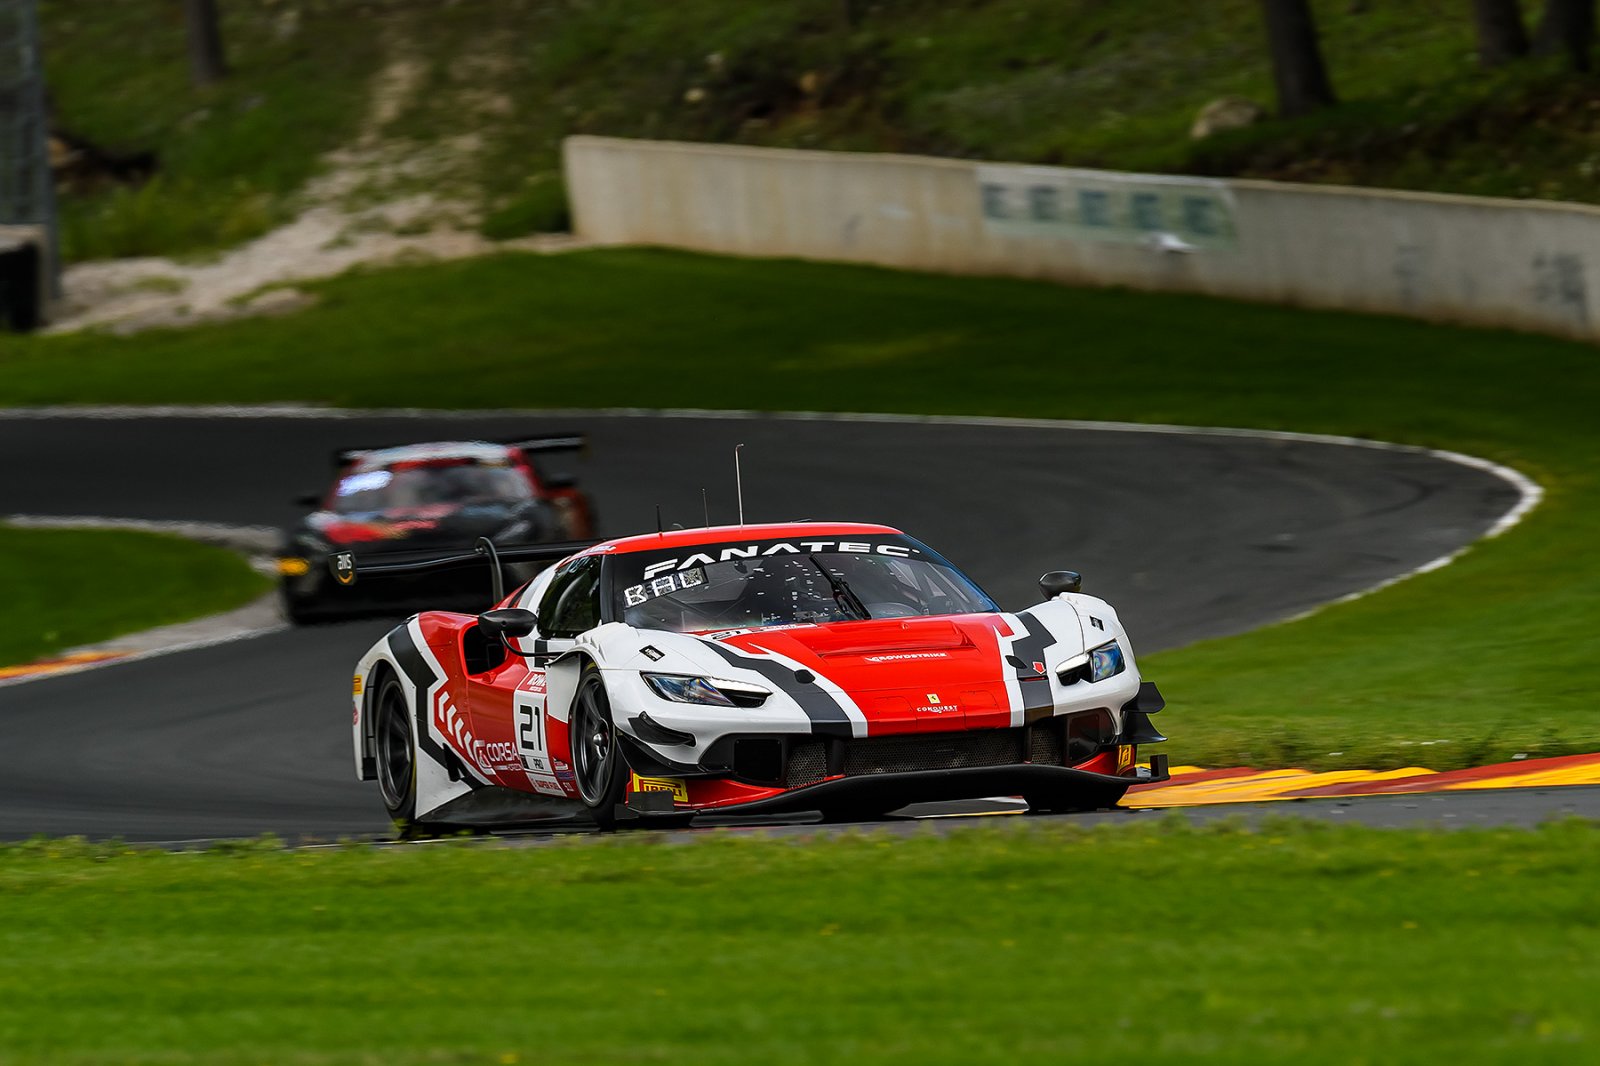 Conquest Racing W/ Ferrari Ready for Podium Return in Fifth Round of the GT World Challenge Championship at Road America